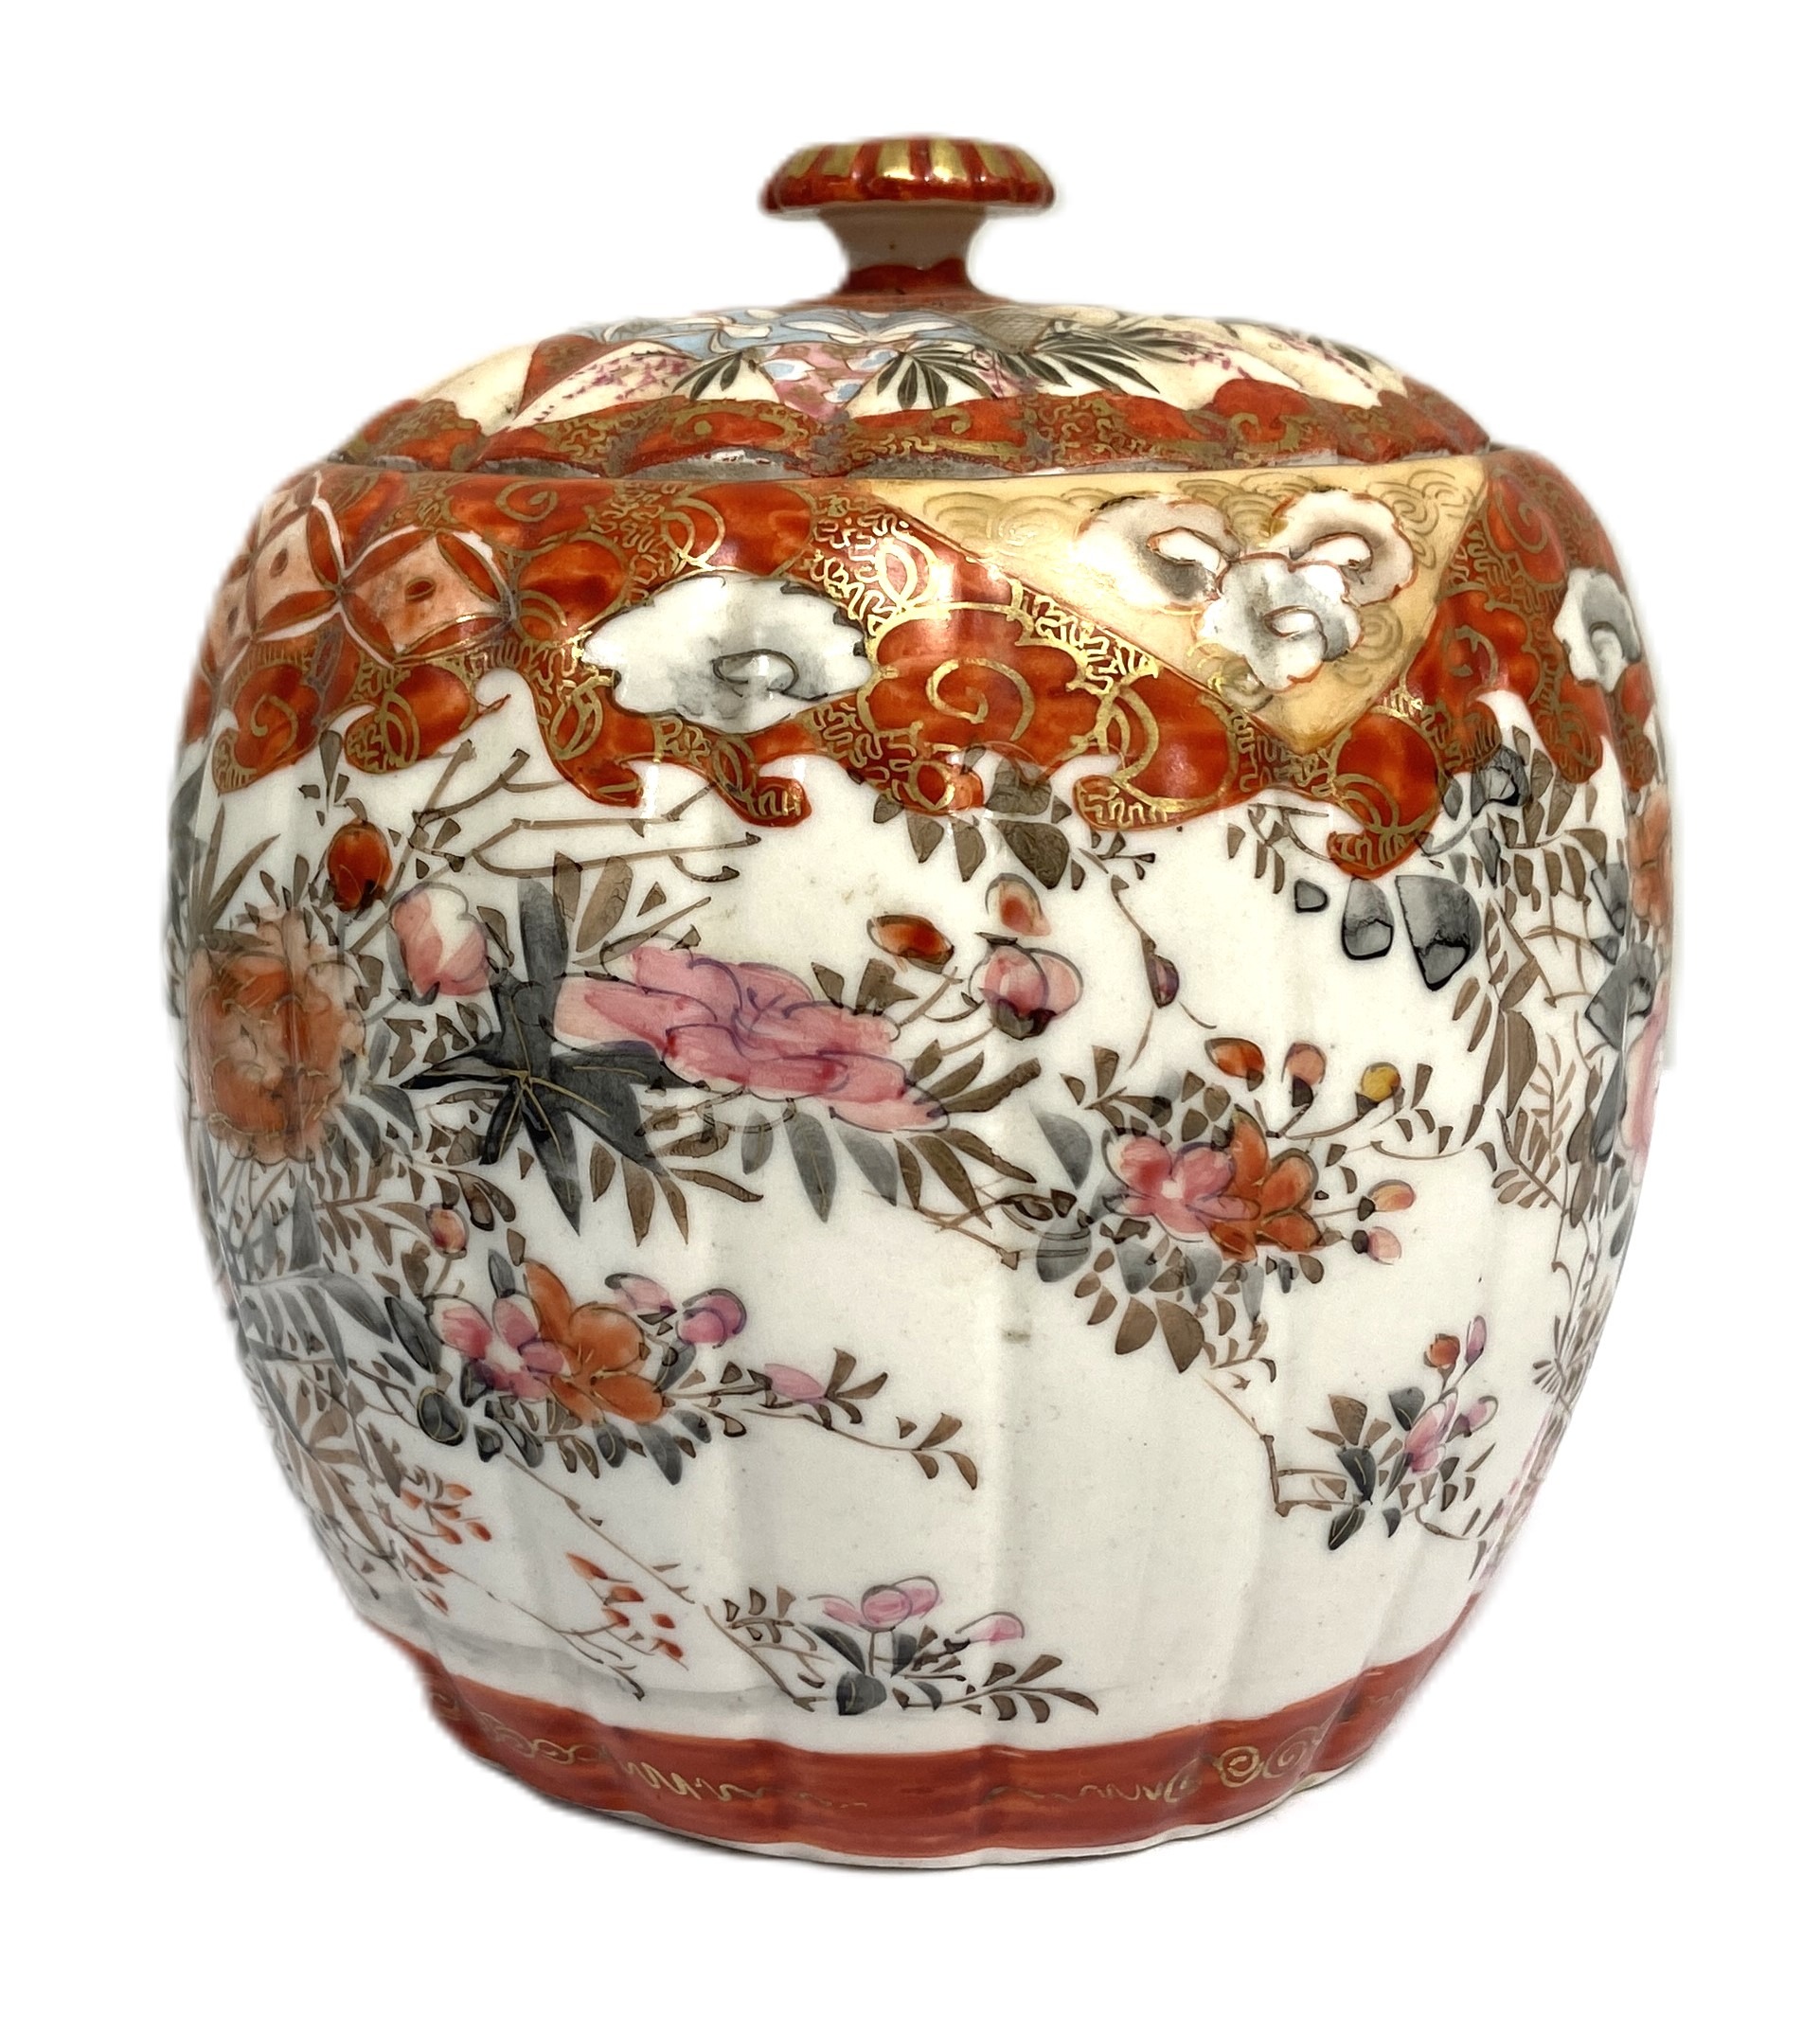 A Chinese export famille verte porcelain punch bowl, probably Qianlong, 18th century, decorated with - Image 7 of 7